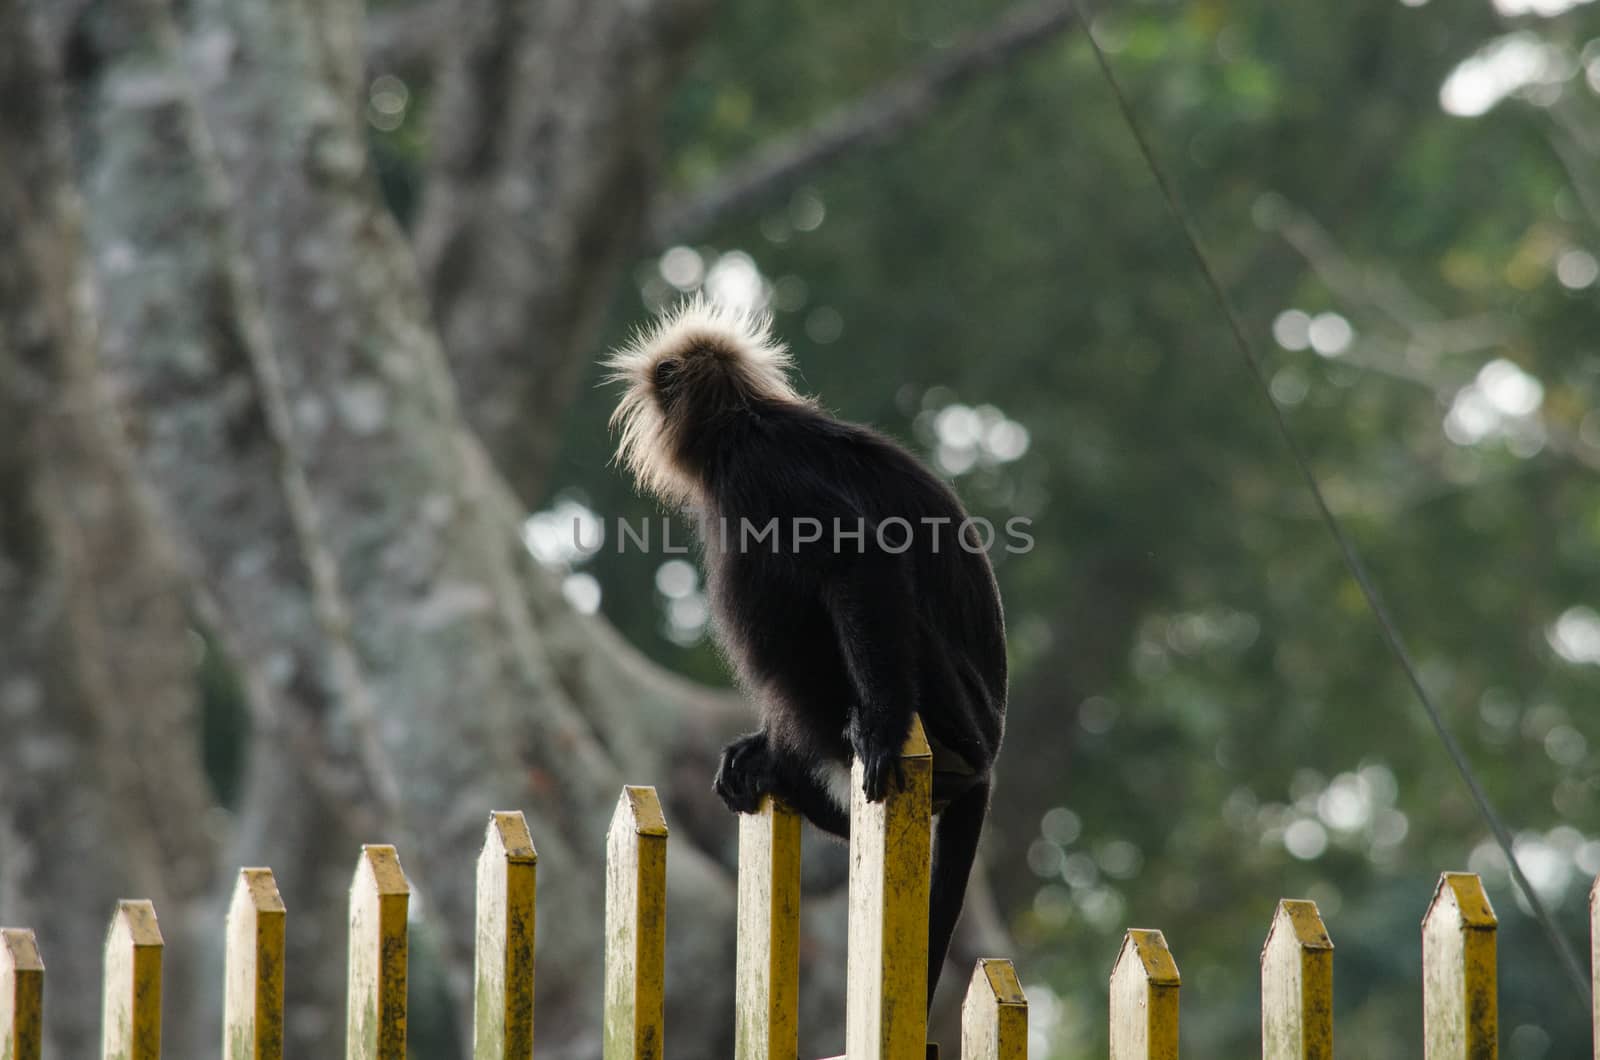 langur is climbing on the tree for eat friut in forest